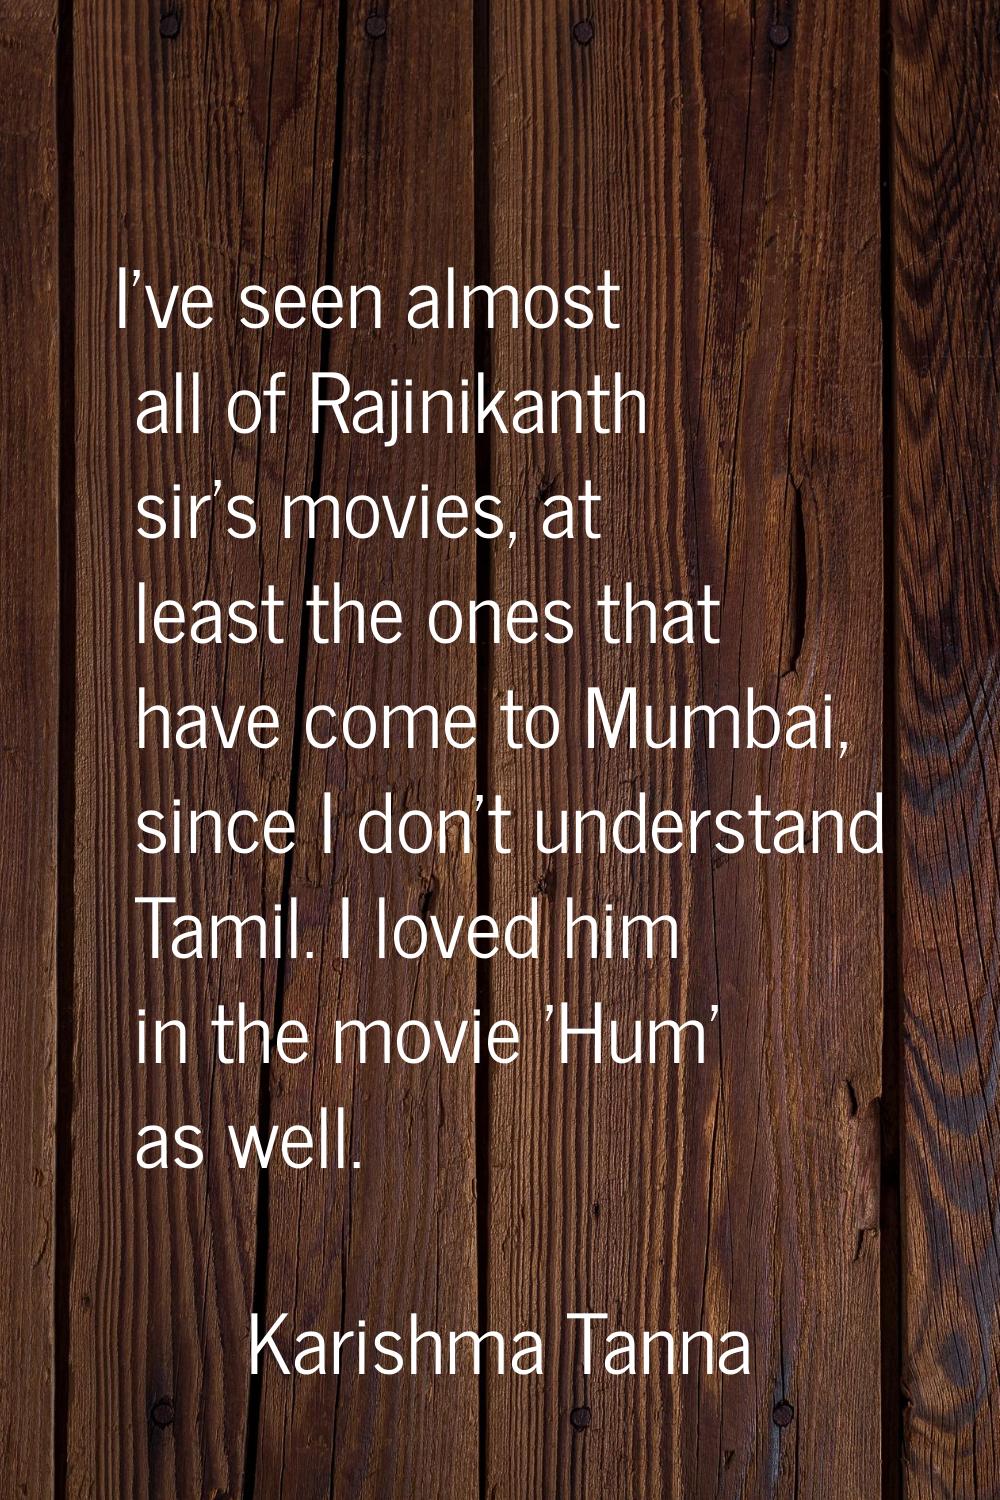 I've seen almost all of Rajinikanth sir's movies, at least the ones that have come to Mumbai, since